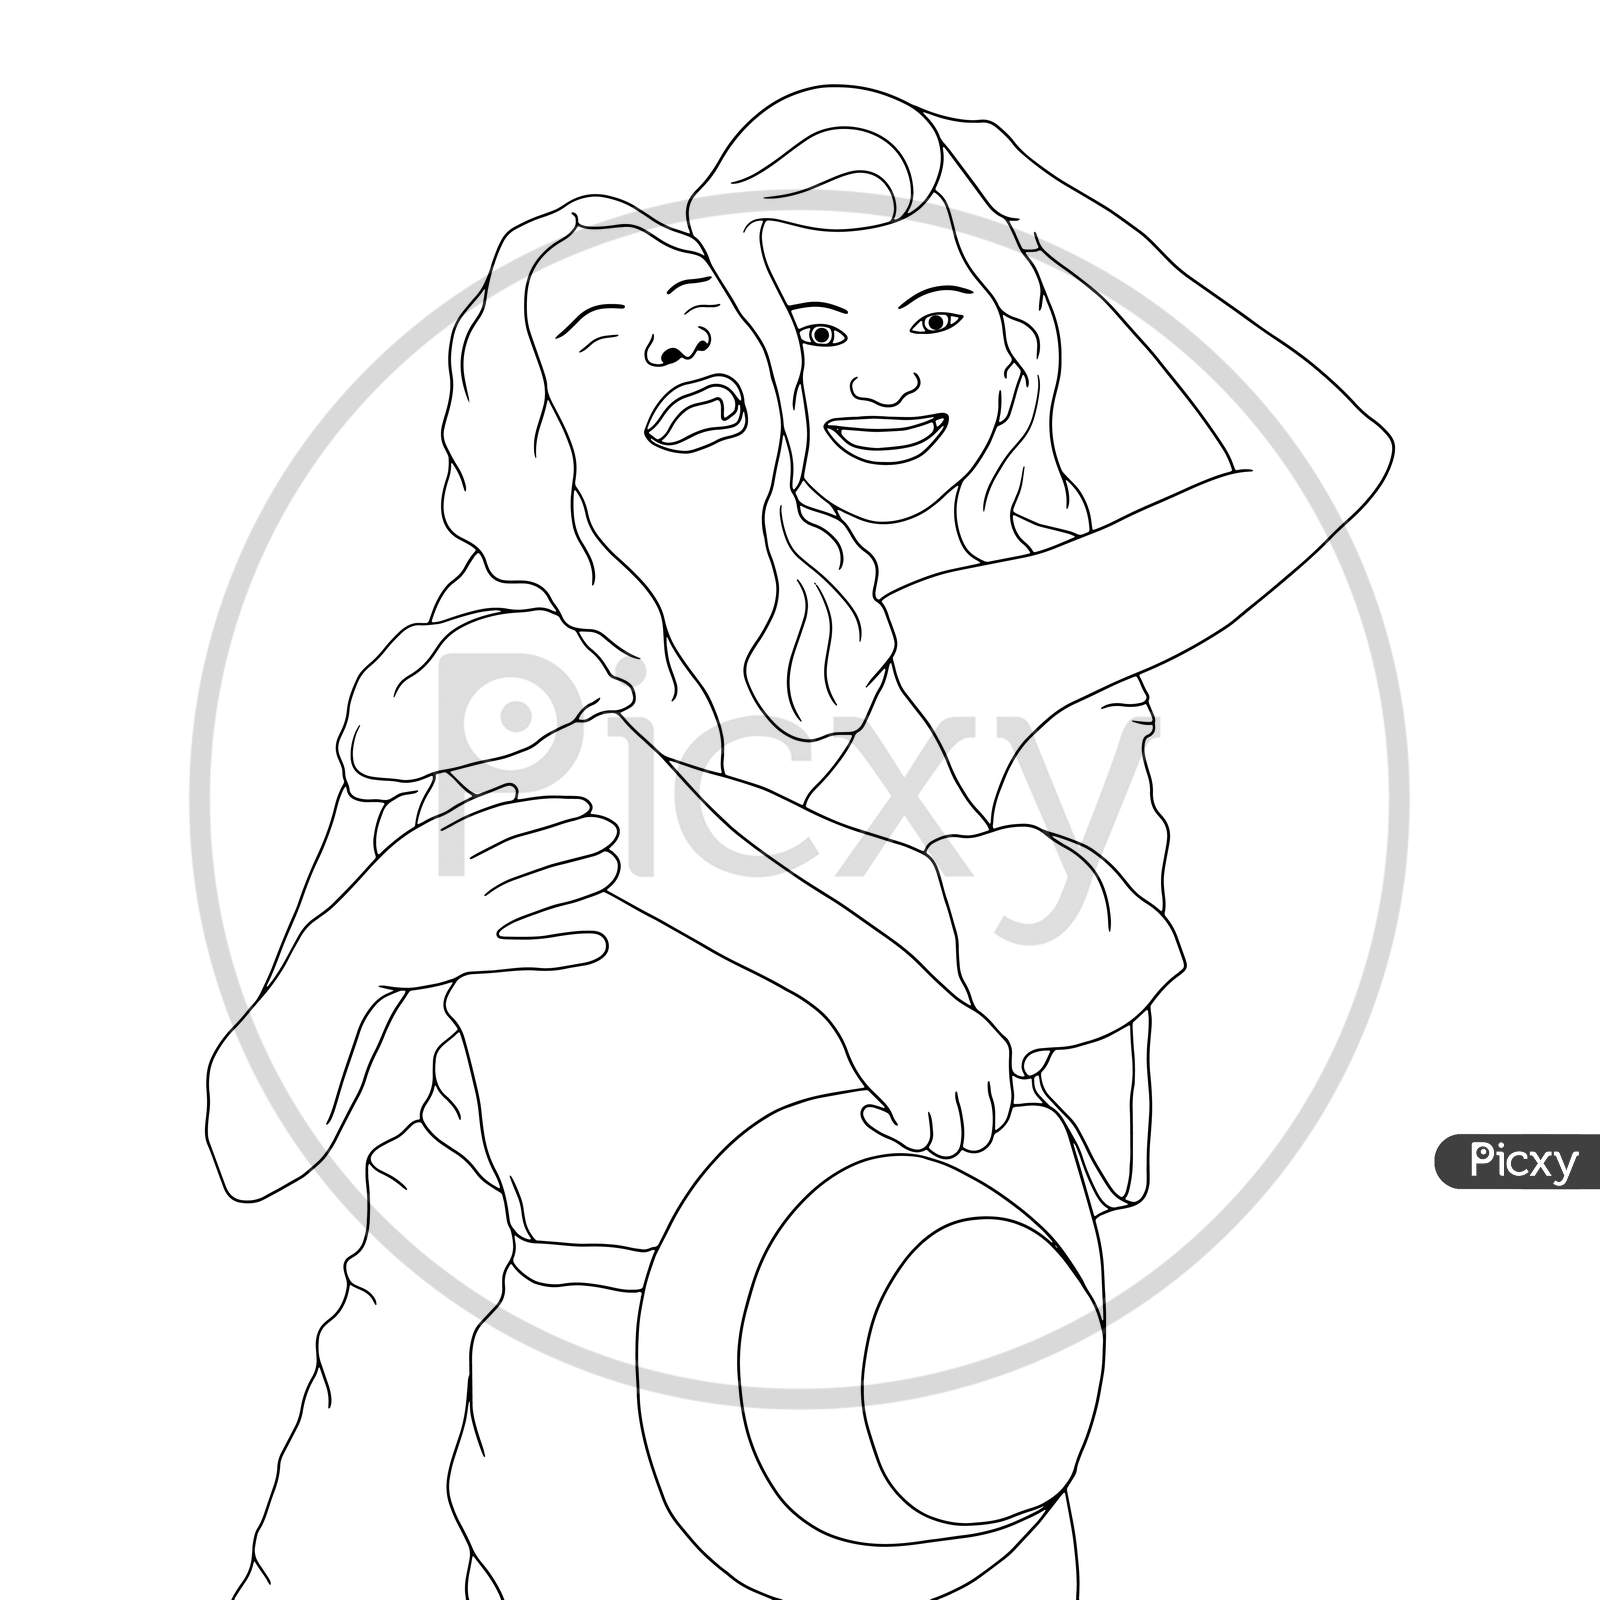 how to draw a Girl hugging best friend - Draw step by step || Friendship  drawing || Easy dra… | Drawings of friends, Cute best friend drawings,  Pencil drawings easy